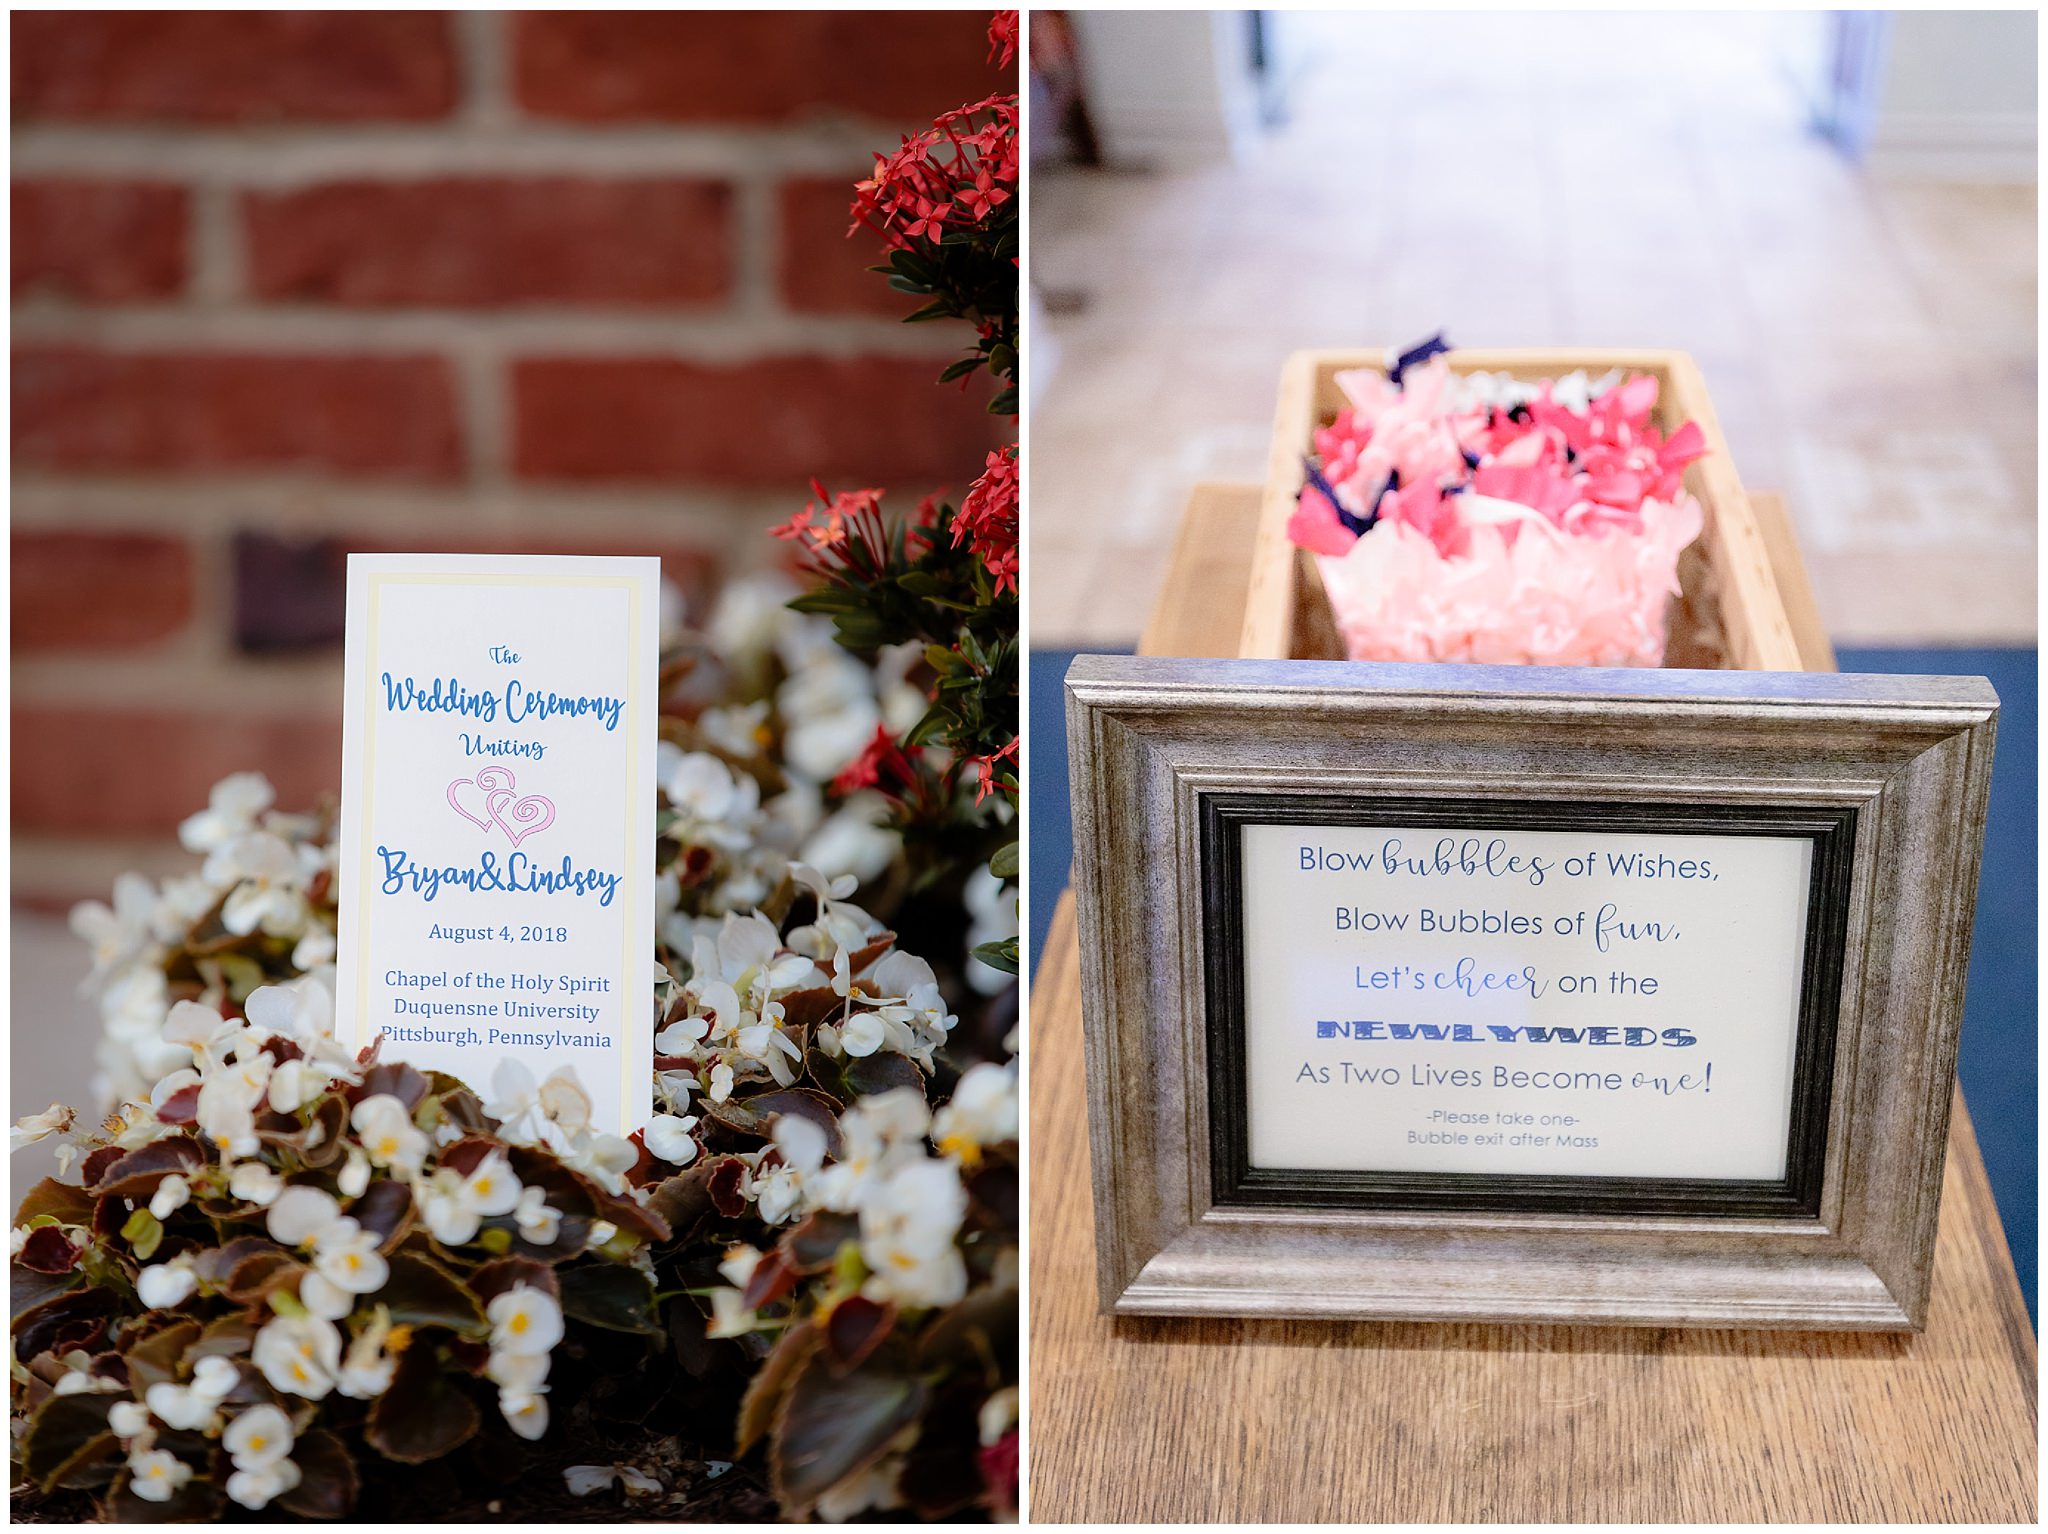 Wedding programs and bubbles at Duquesne University